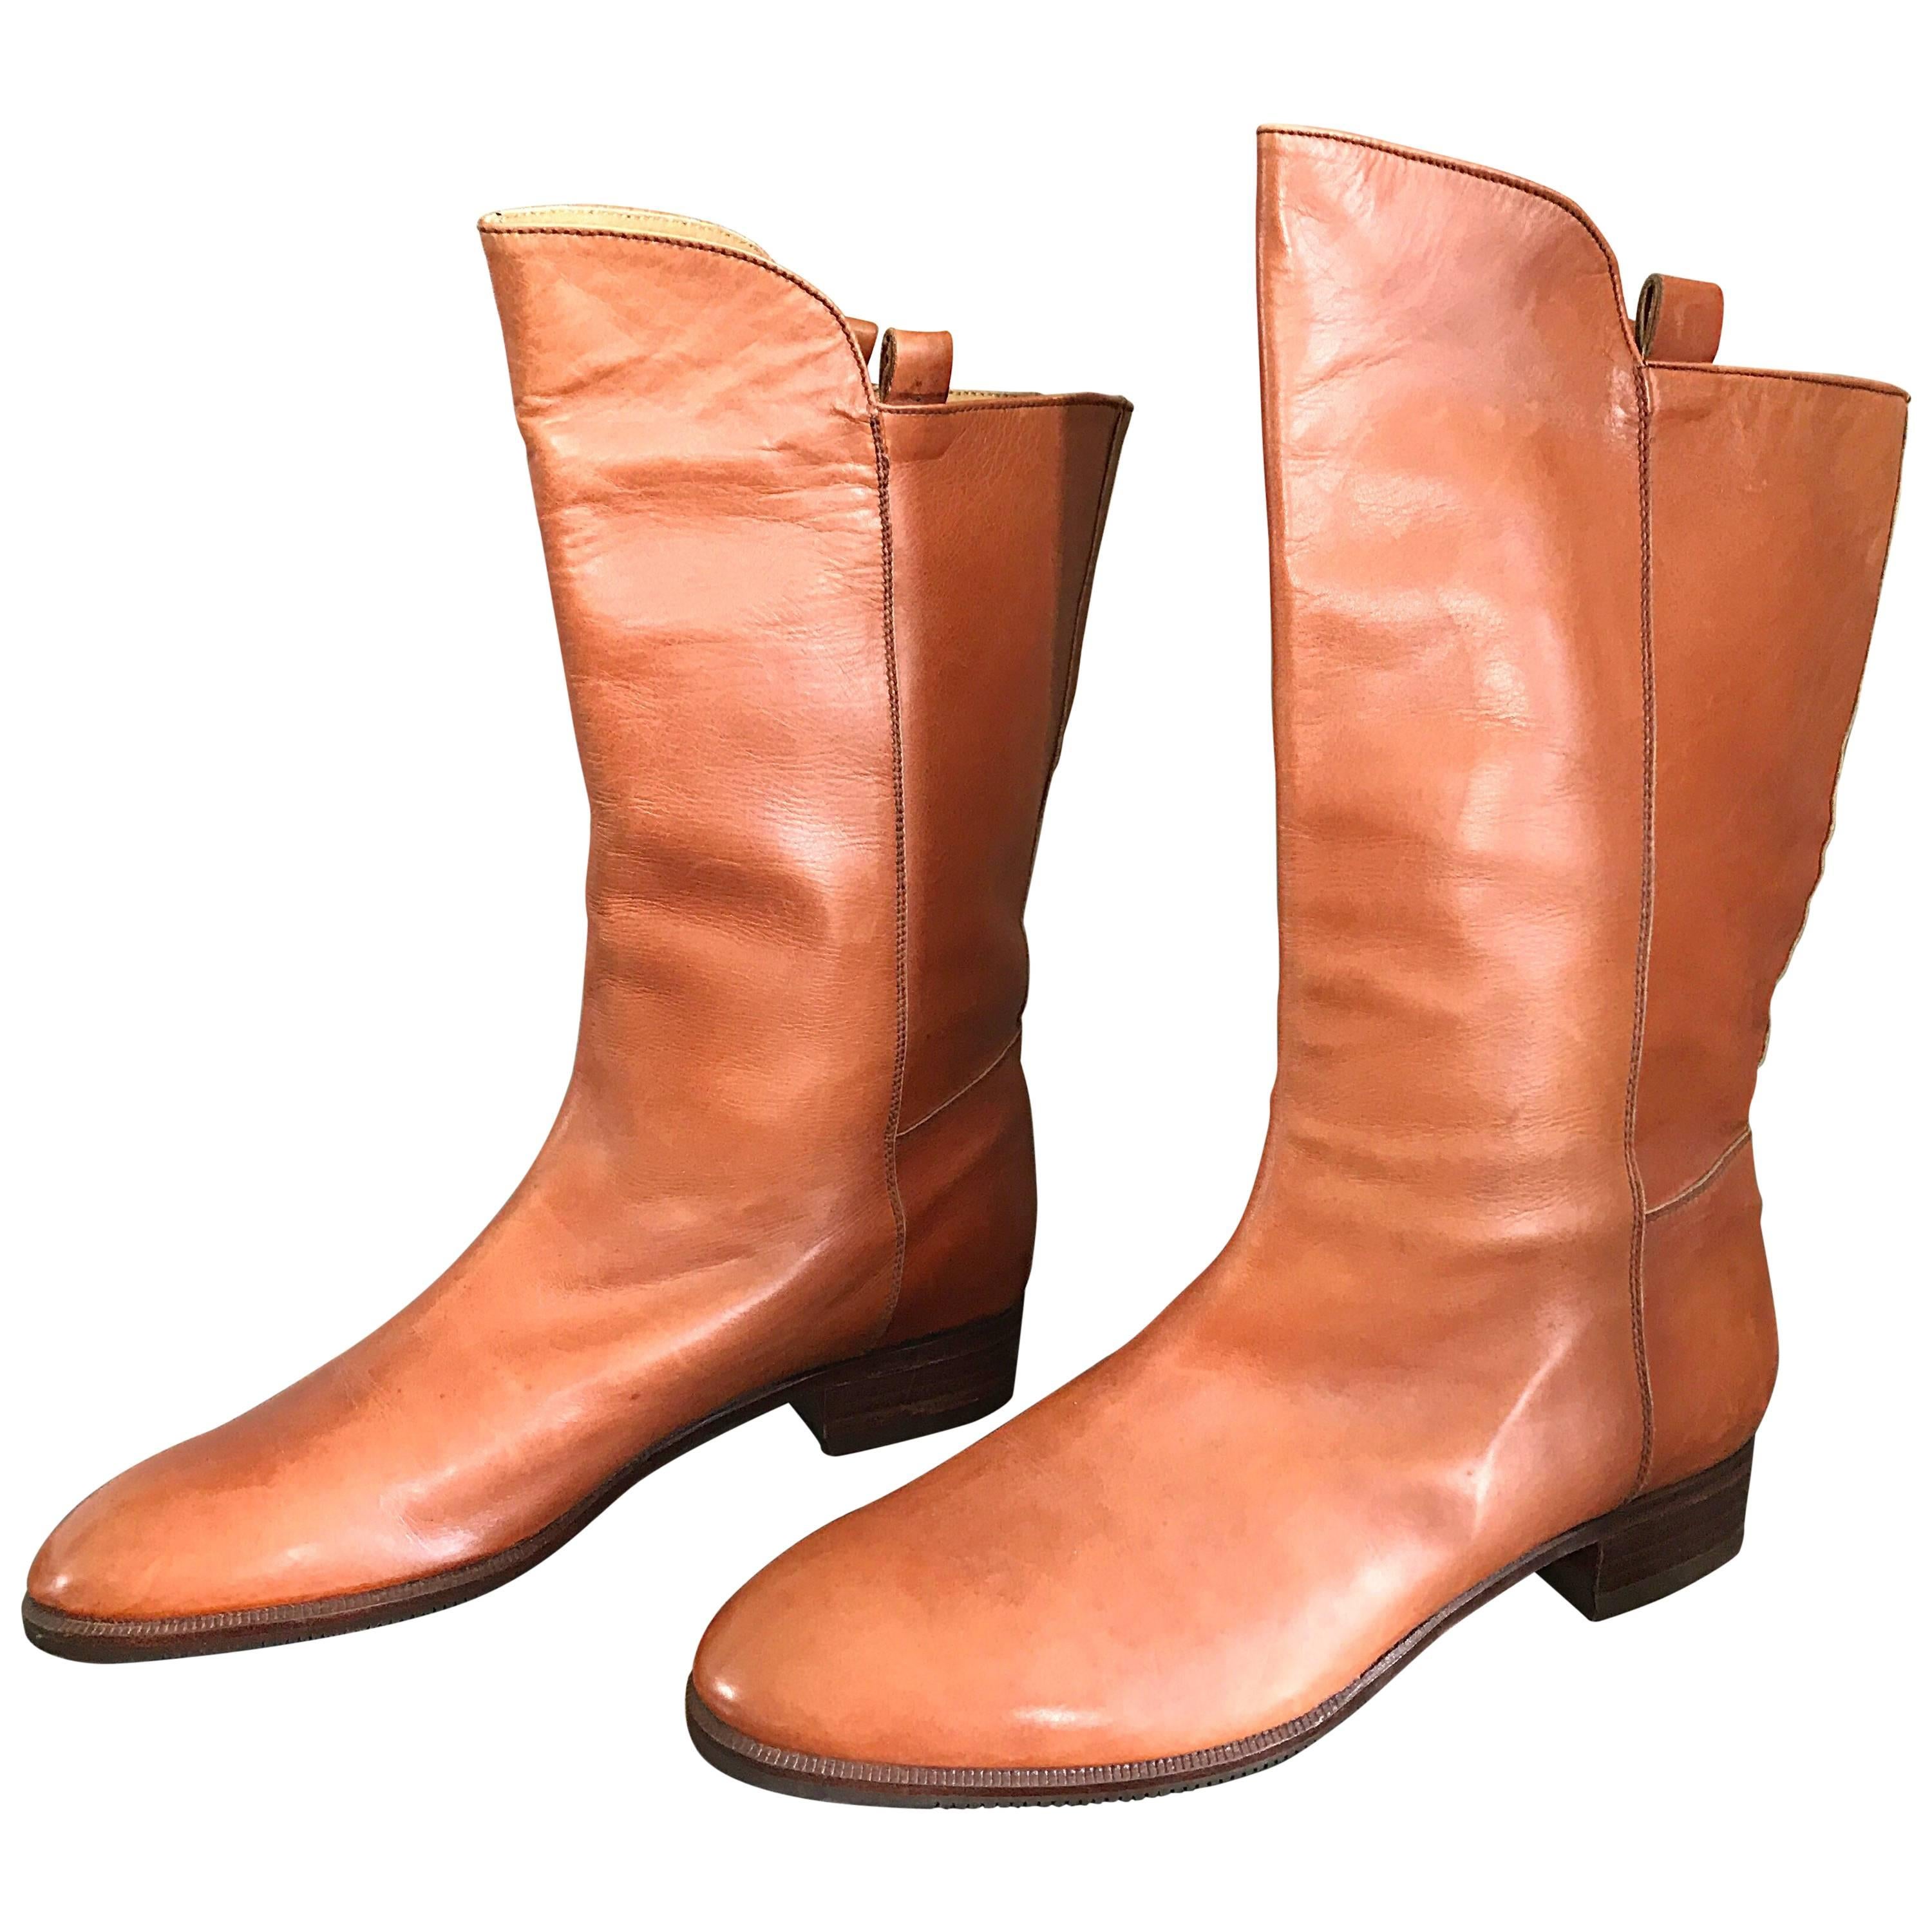 New 1980s Perry Ellis Size 6 Tan Saddle Leather Deadstock Calf Booties Boots